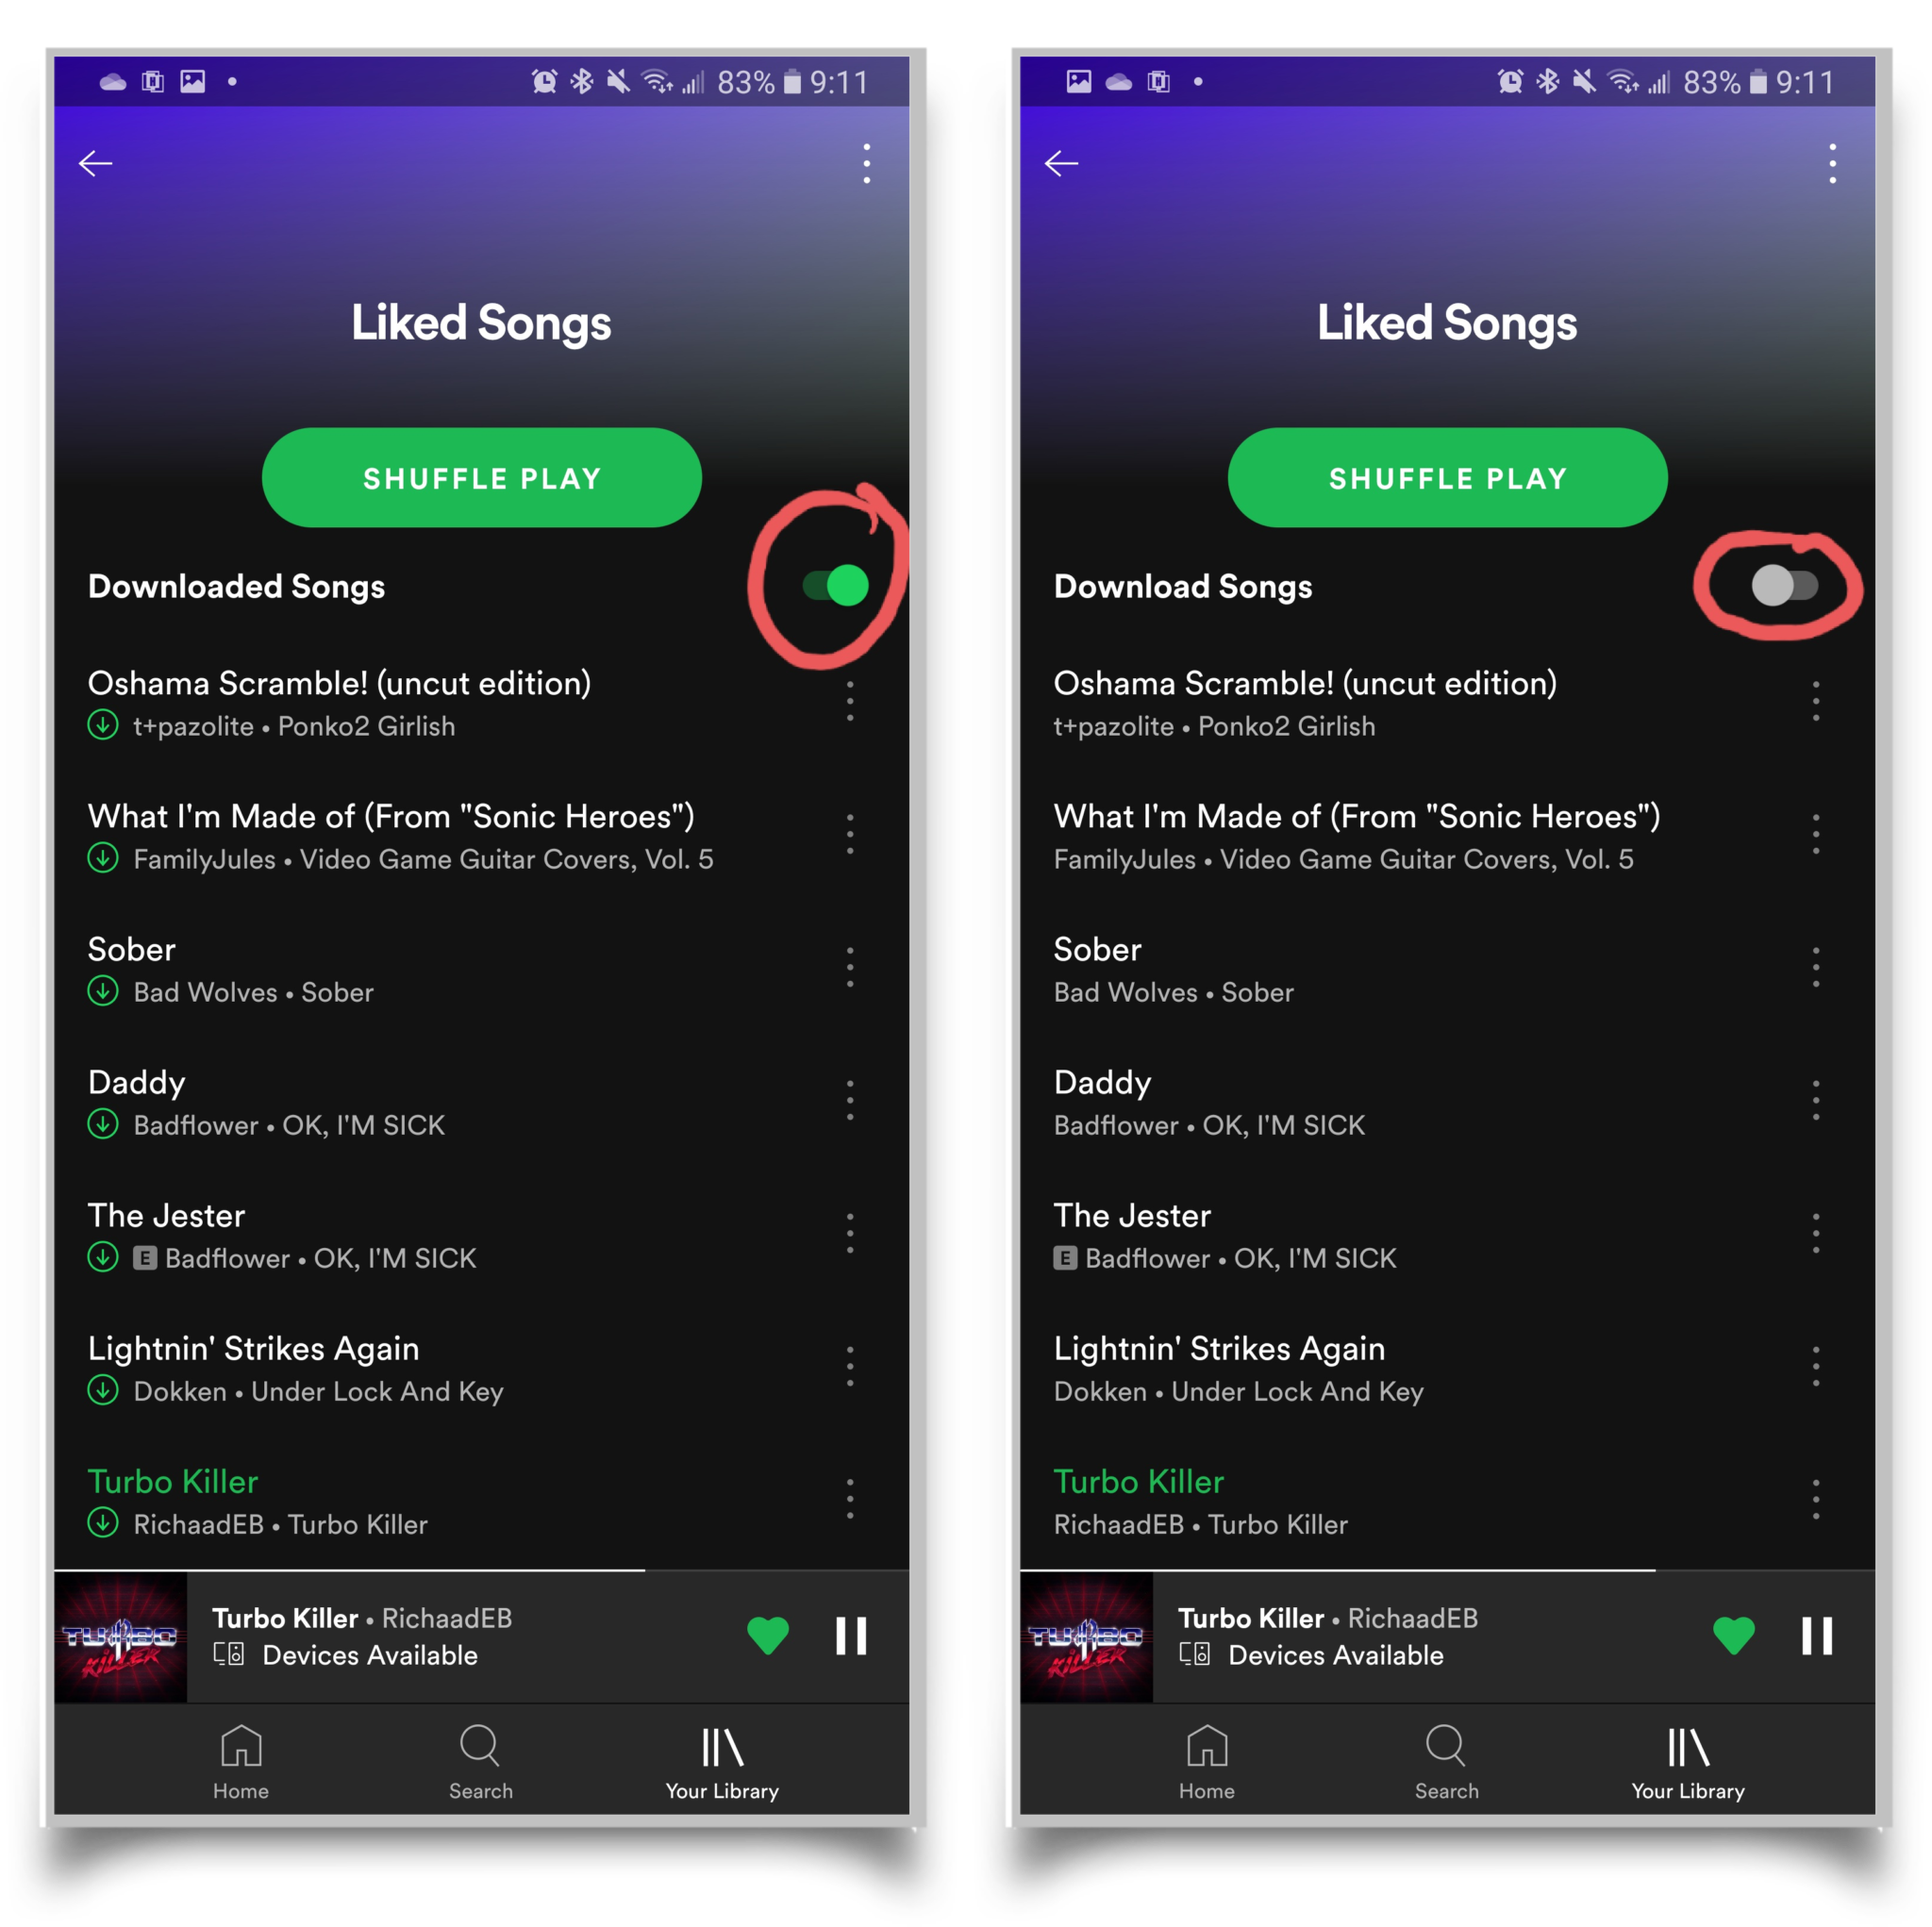 how to download songs on spotify using data